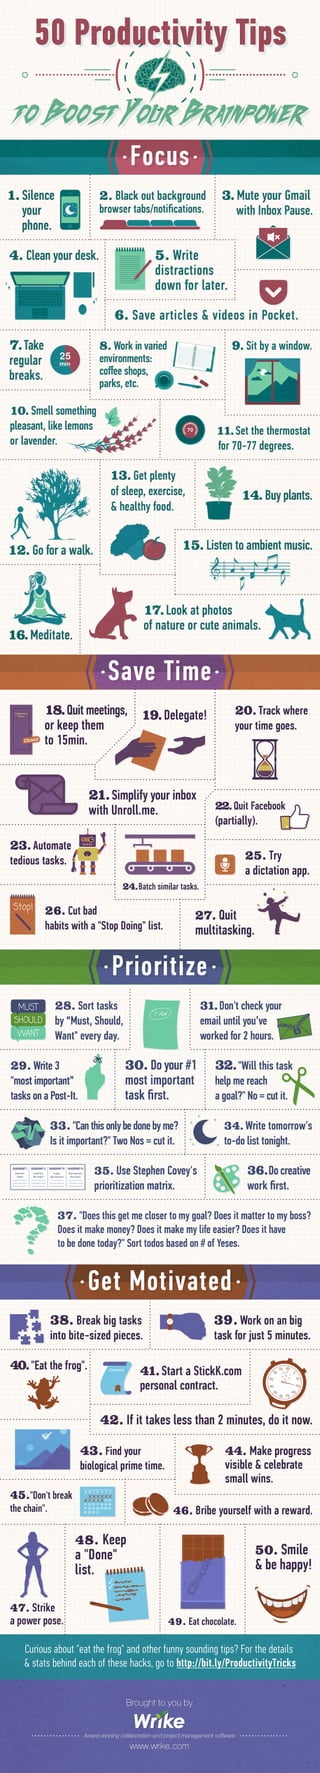 50 Productivity Hacks to Boost Your Brainpower (Infographic)